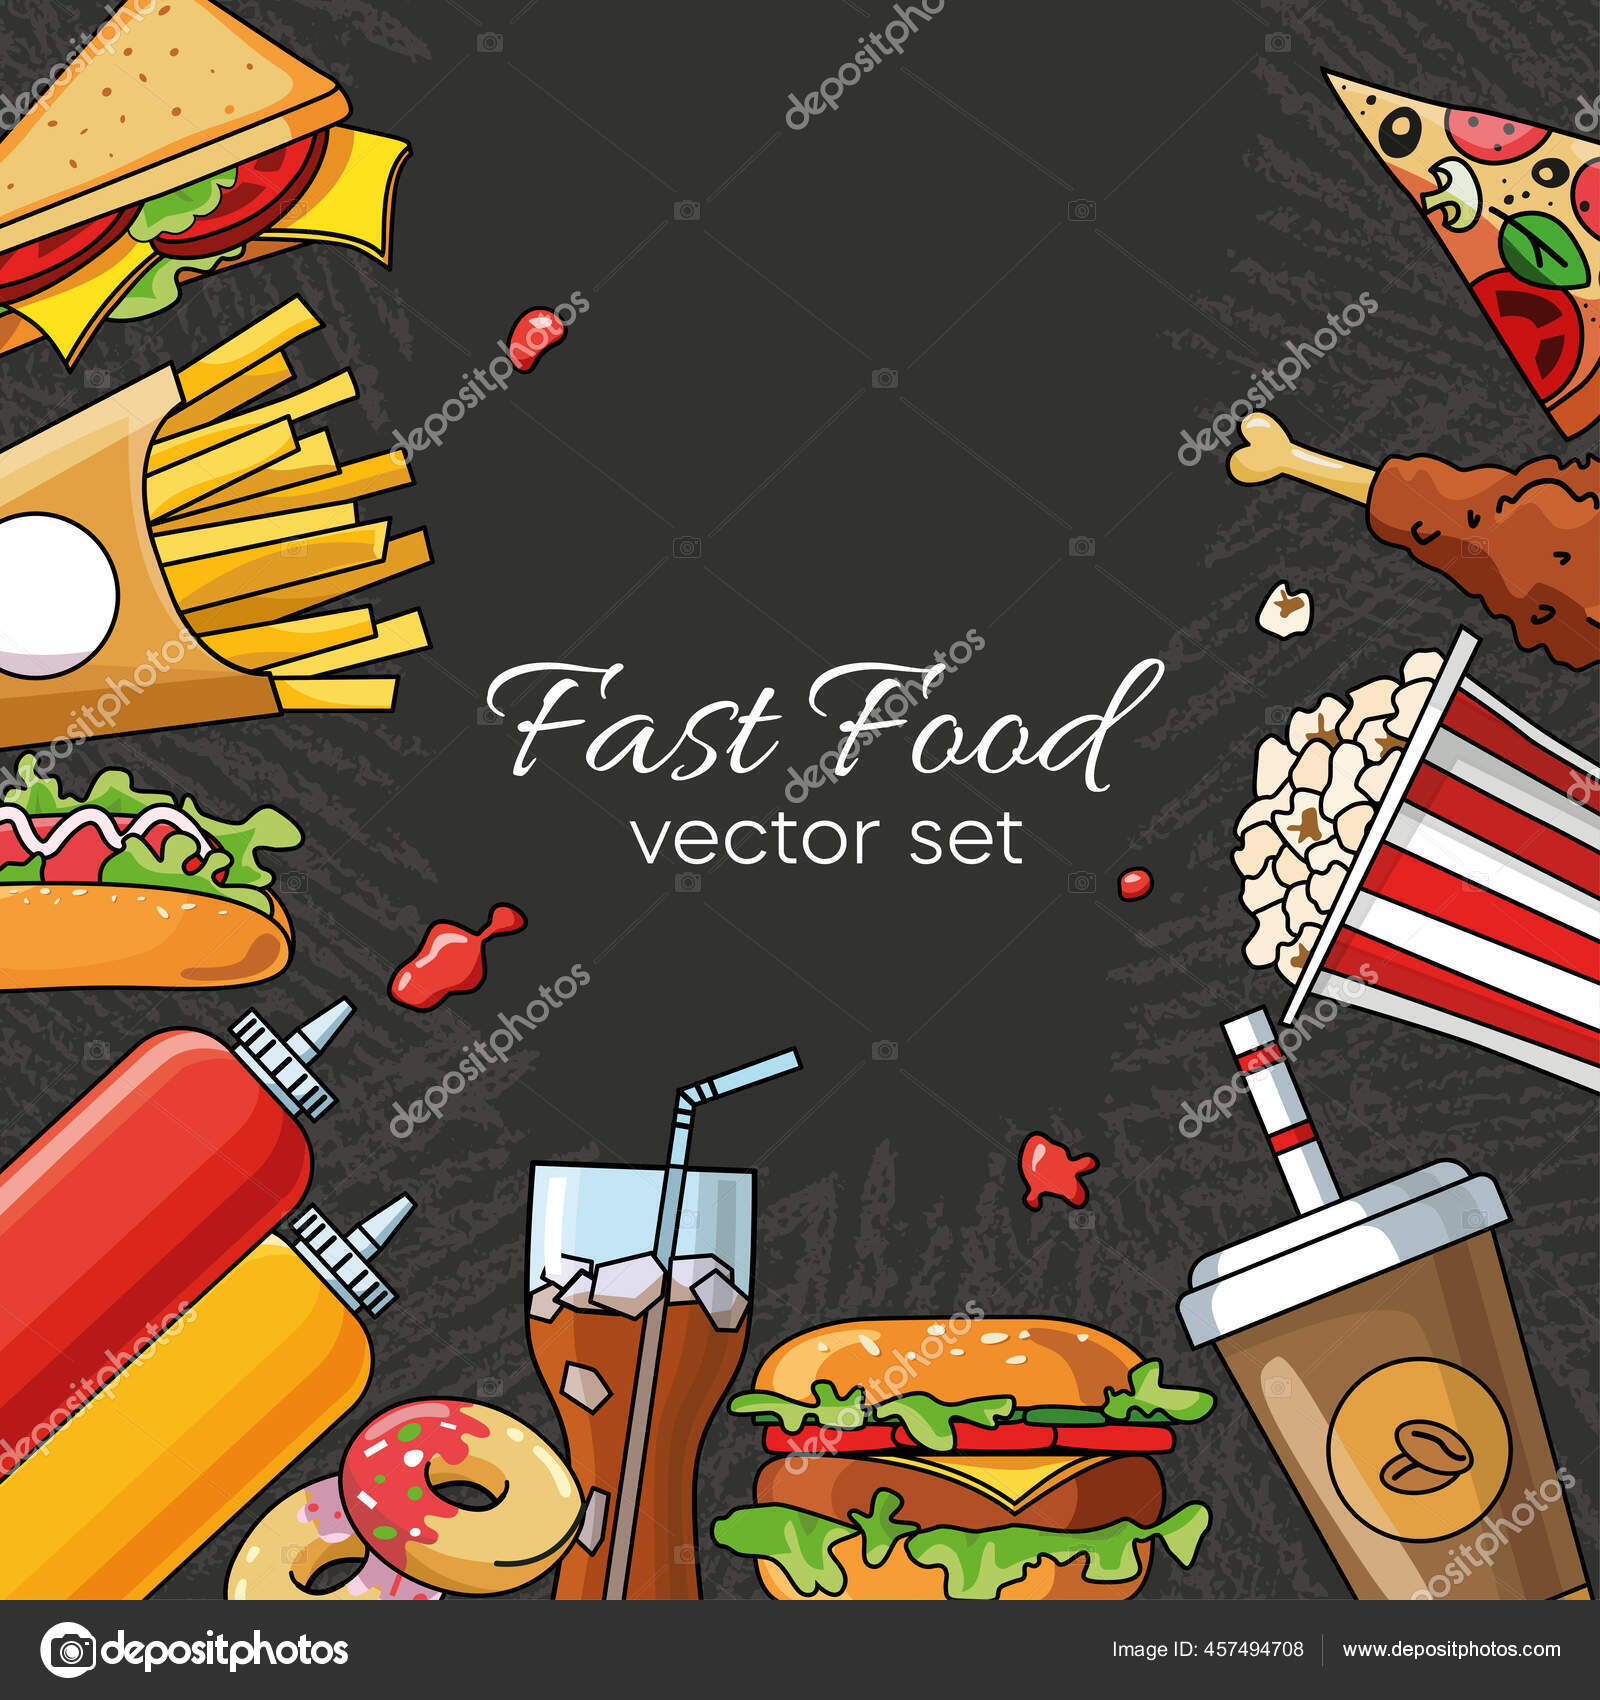 Fast food set vector isolated on black background. Template with junk food.  Tasty set fast food. Unhealthy food in flat style. Banner with hand drawn  colored burgers, drinks, french fries, sandwiche Stock